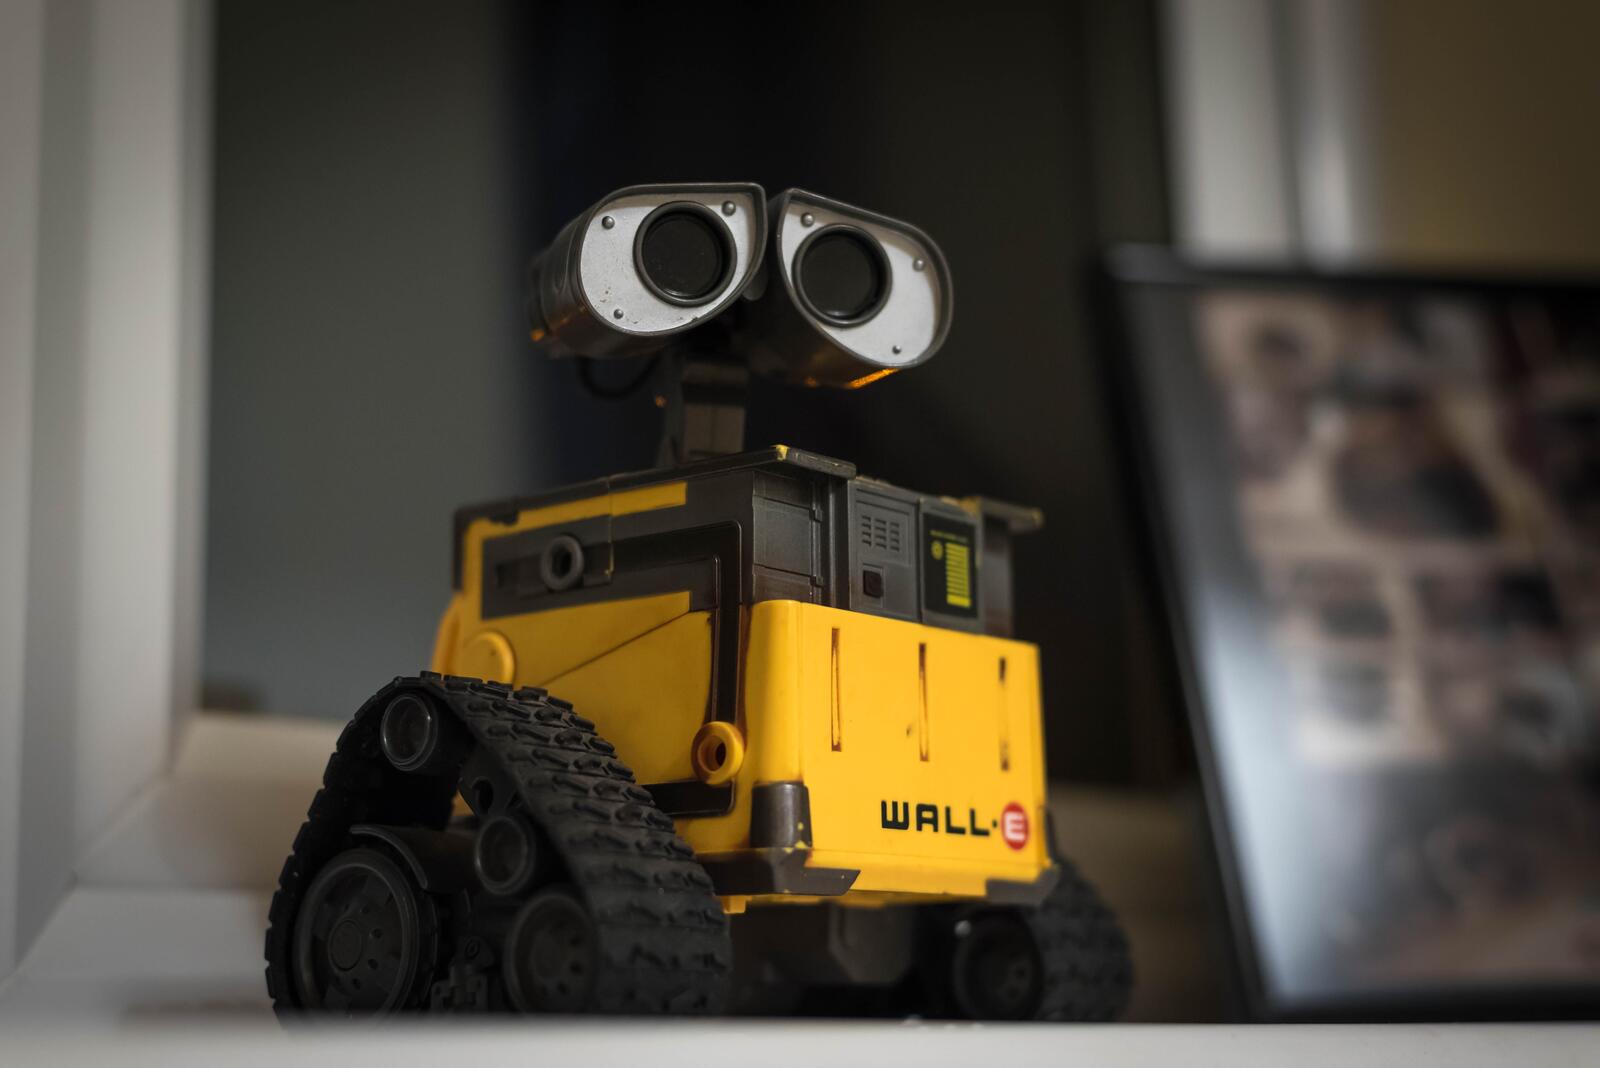 Free photo Toy robot wiley